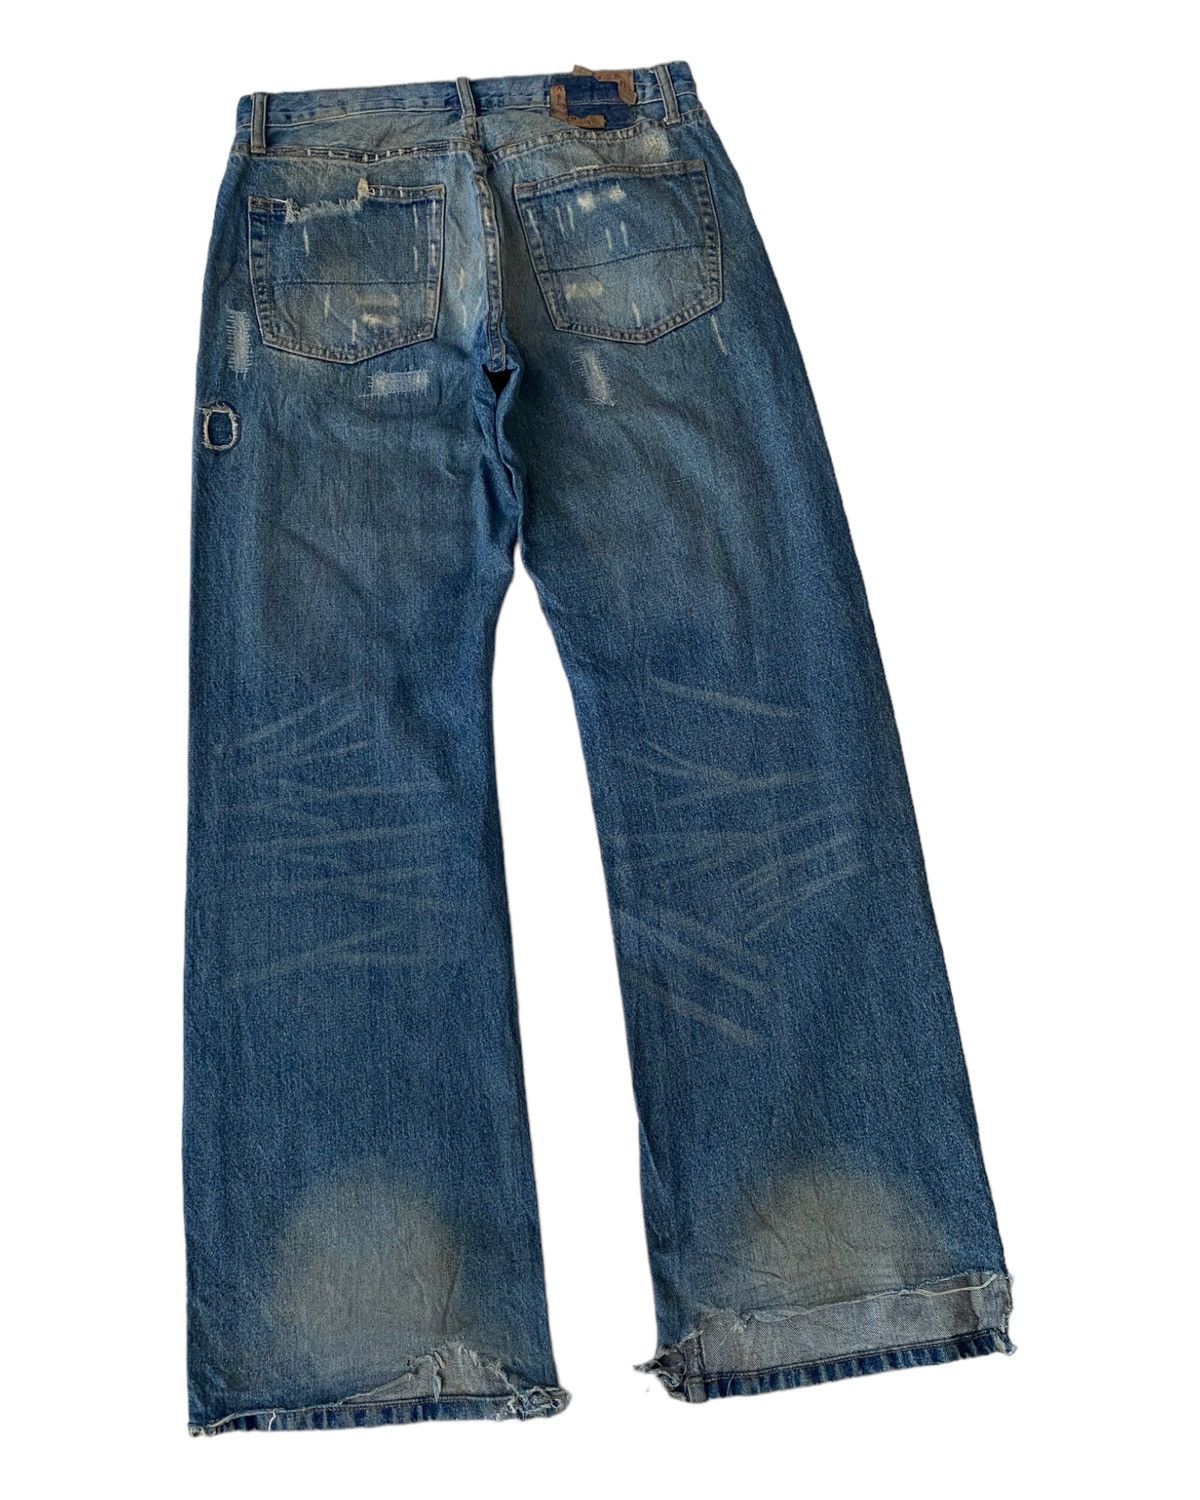 🔥FLARE JEANS RUSTY BAGGY ABERCROMBIE & FITCH DISTRESS DENIM - 4